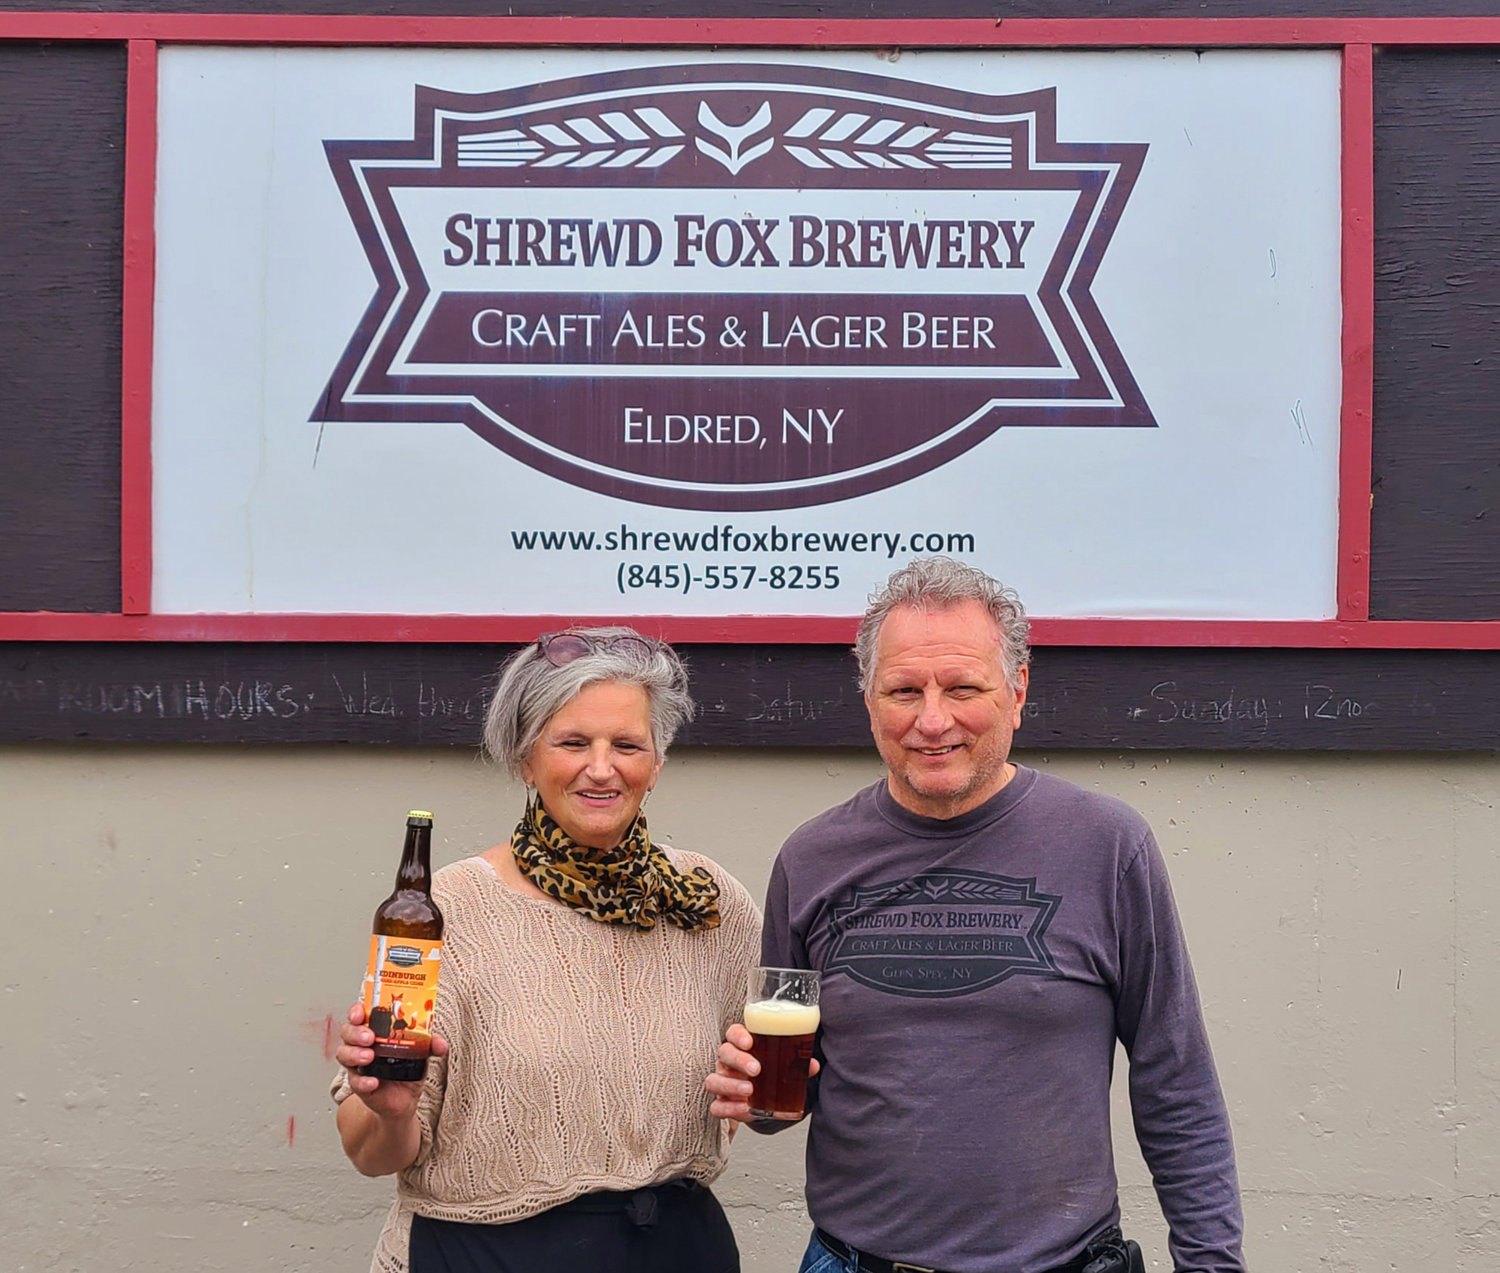 Cindy and Bill Lenczuk, the owners of the Shrewd Fox Brewery in Eldred, will be holding an Uktoberfest on Saturday October 2nd in the Brewery’s Beer Garden from Noon-5pm. The festival will highlight their award winning craft beers, natural hard ciders and Ukrainian food.